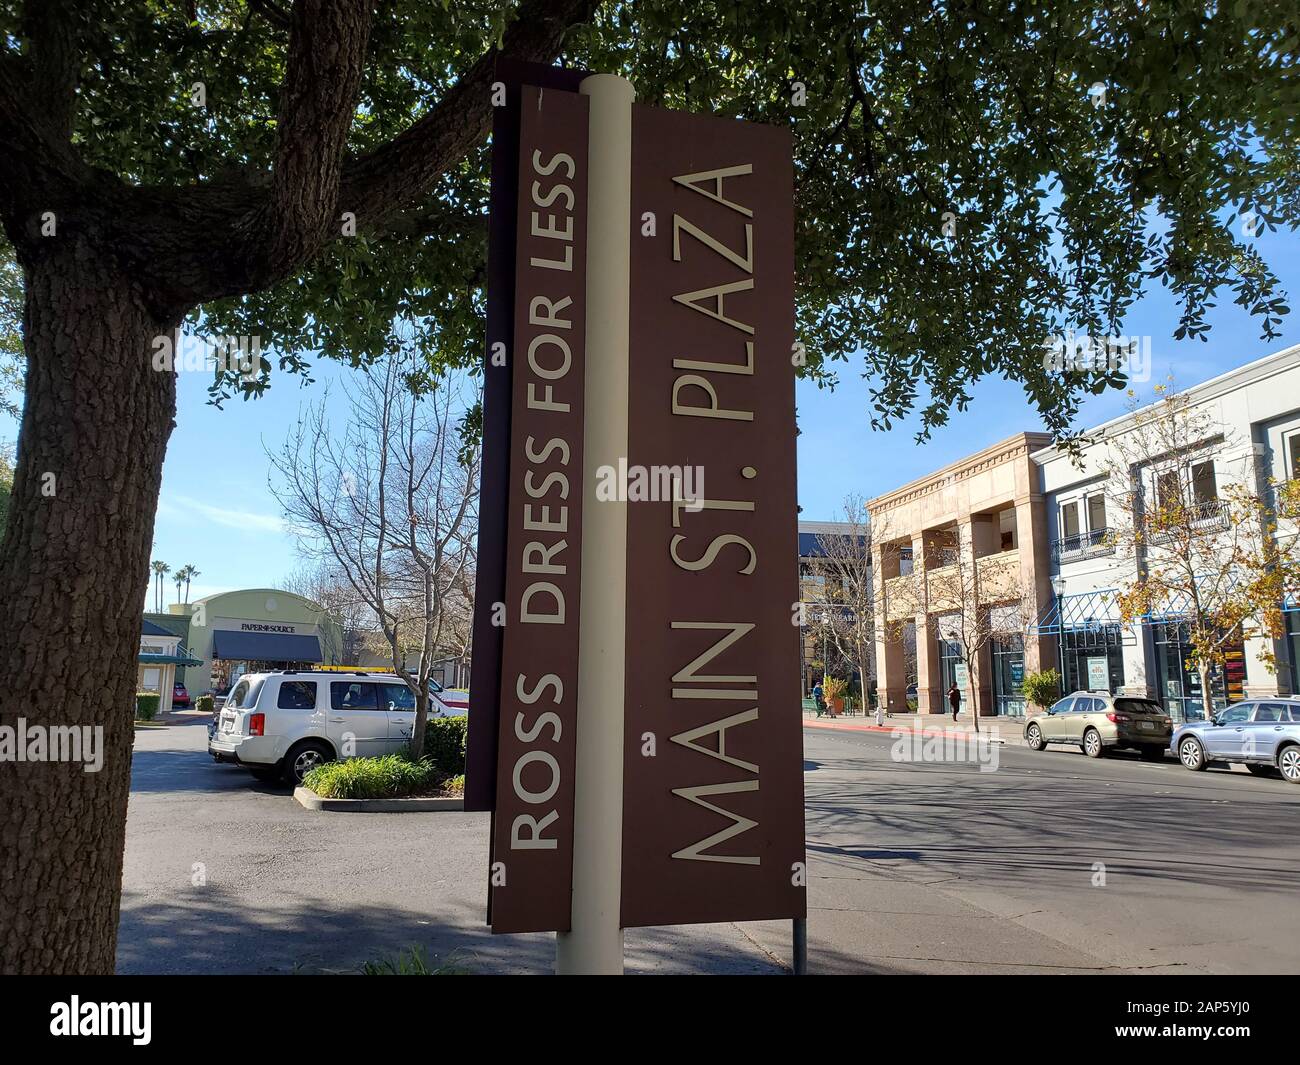 Sign for Ross retail store and Main Street Plaza in downtown Walnut